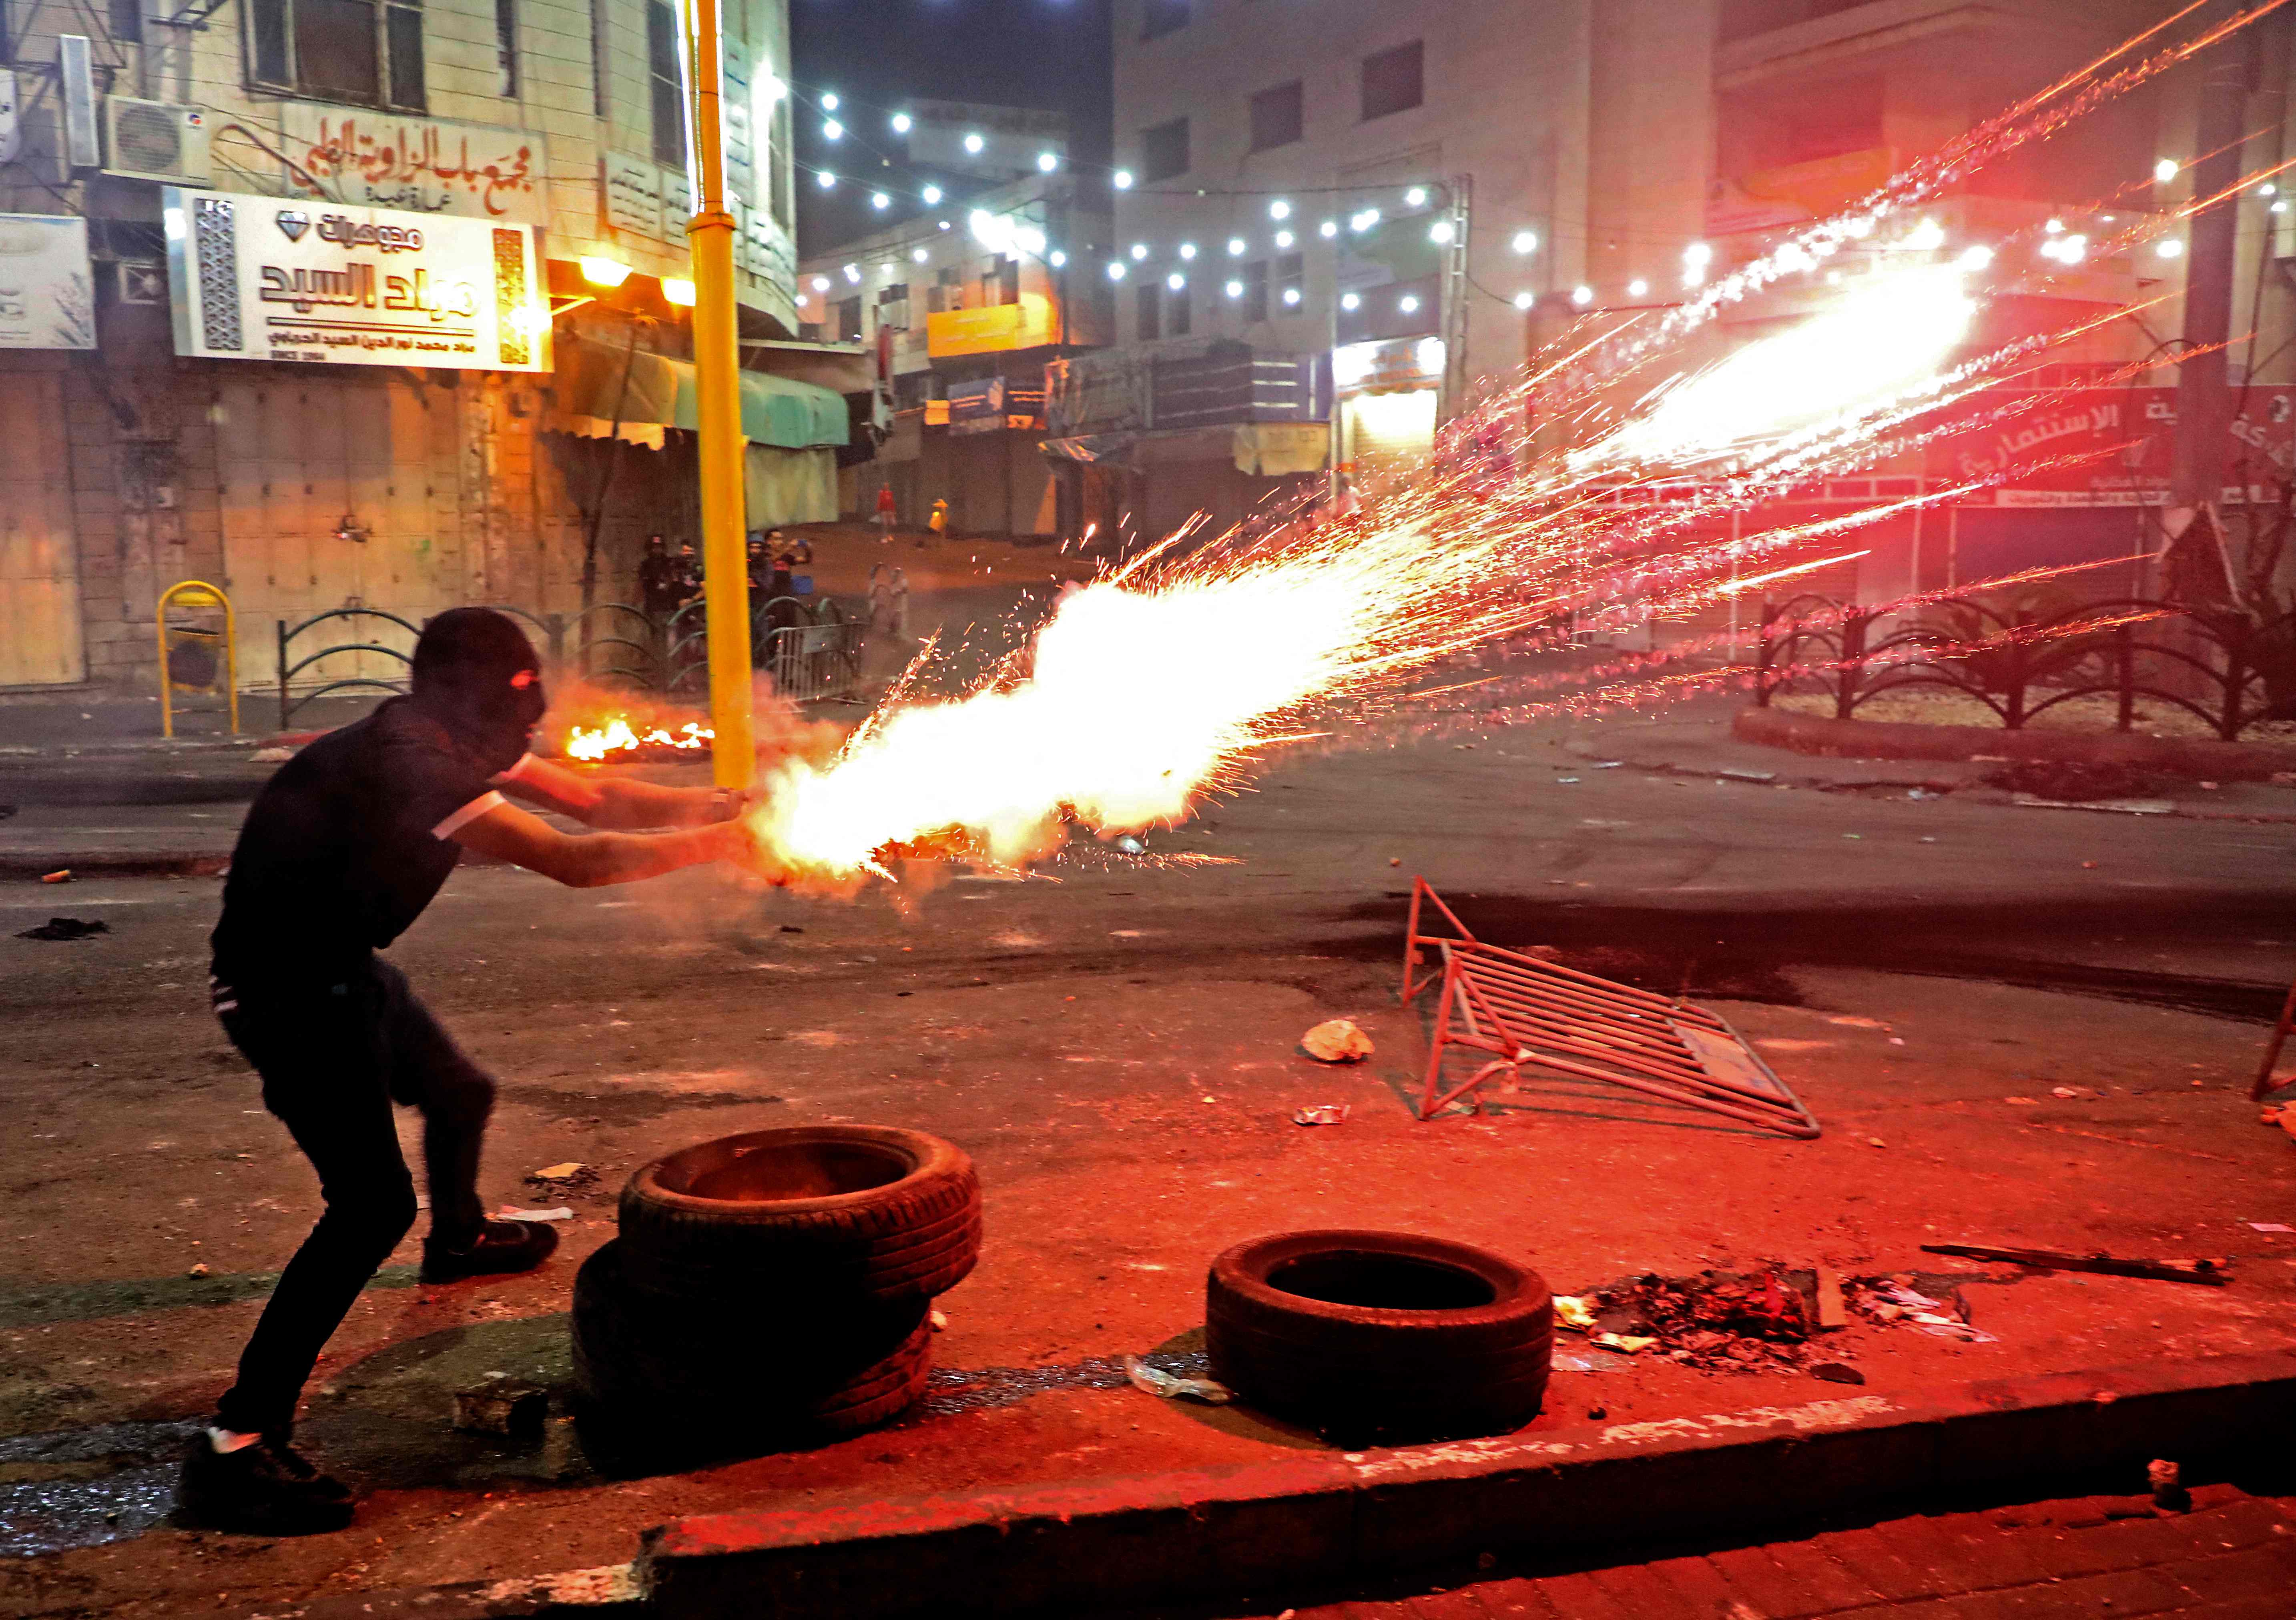 A Palestinian protester launches flares amid clashes with Israeli soldiers in the city centre of Hebron in the West Bank